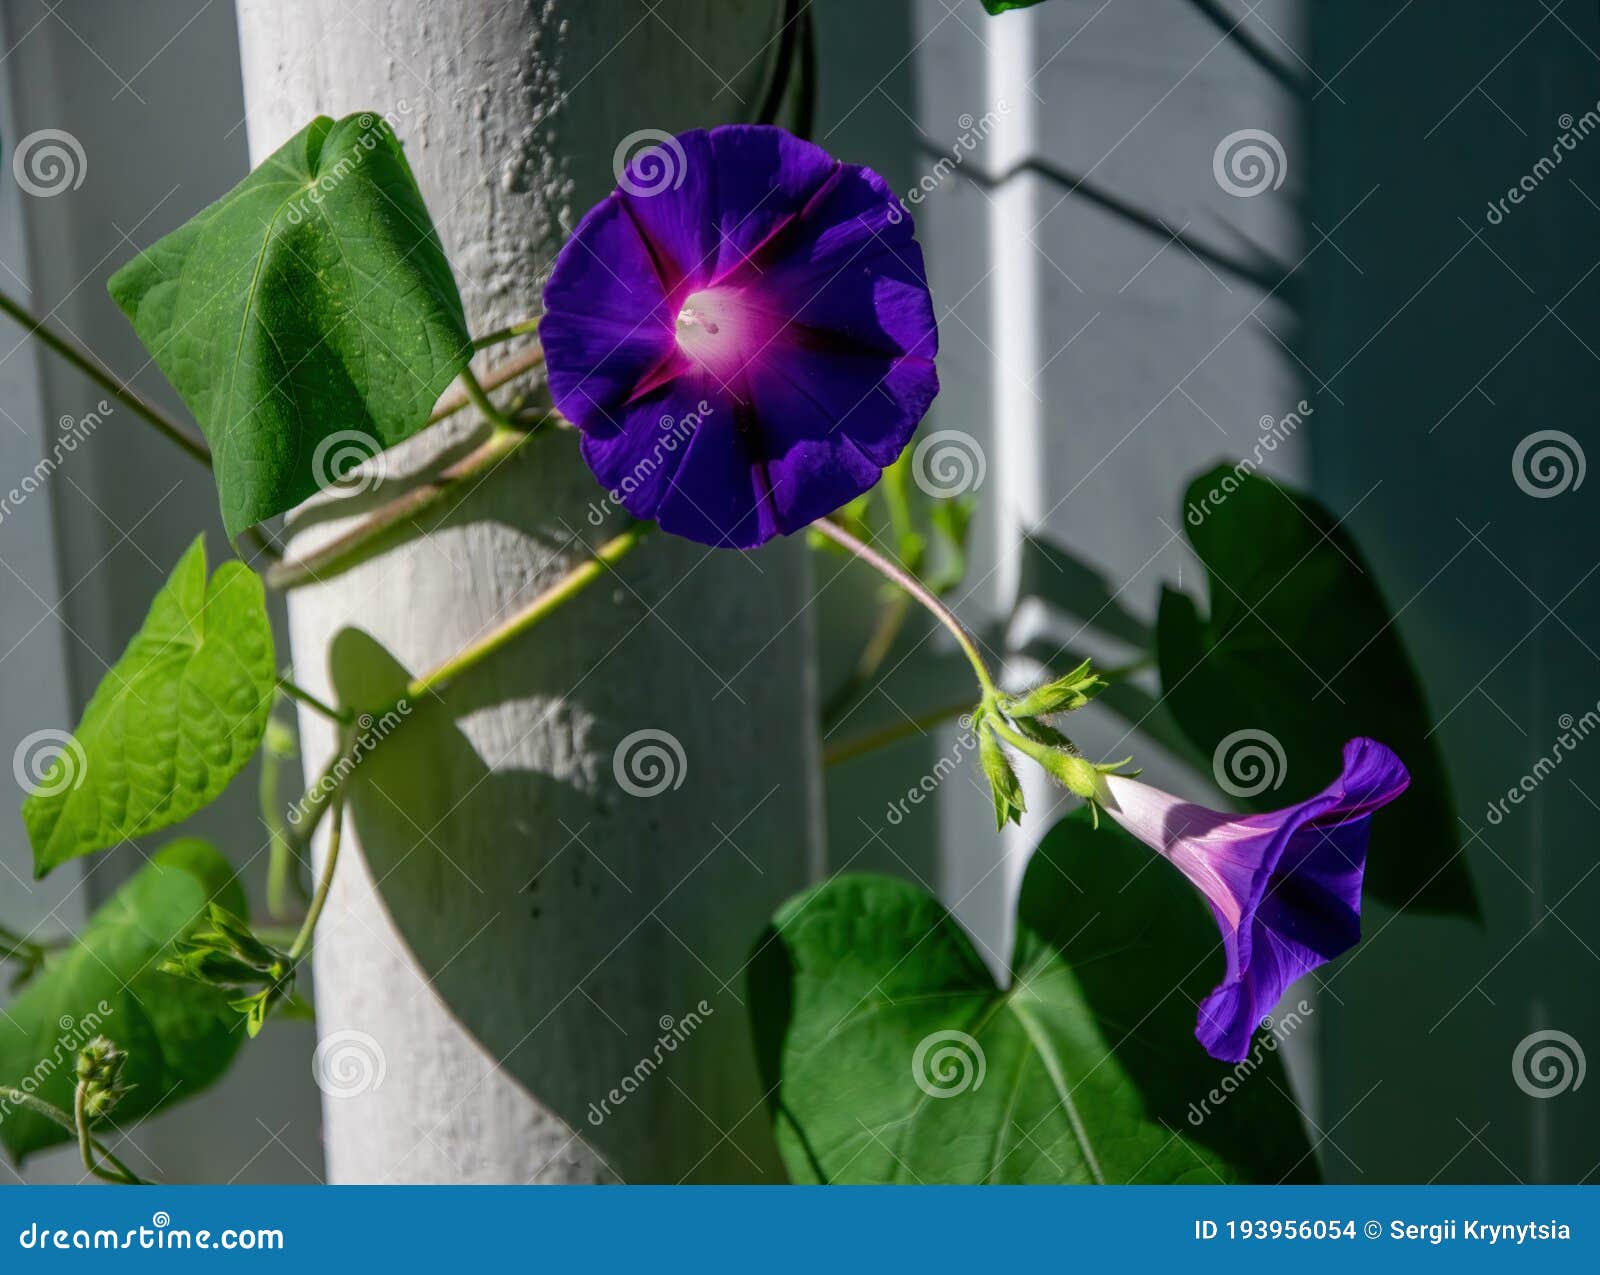 blue and purple morning glory flowers curling around a pillar